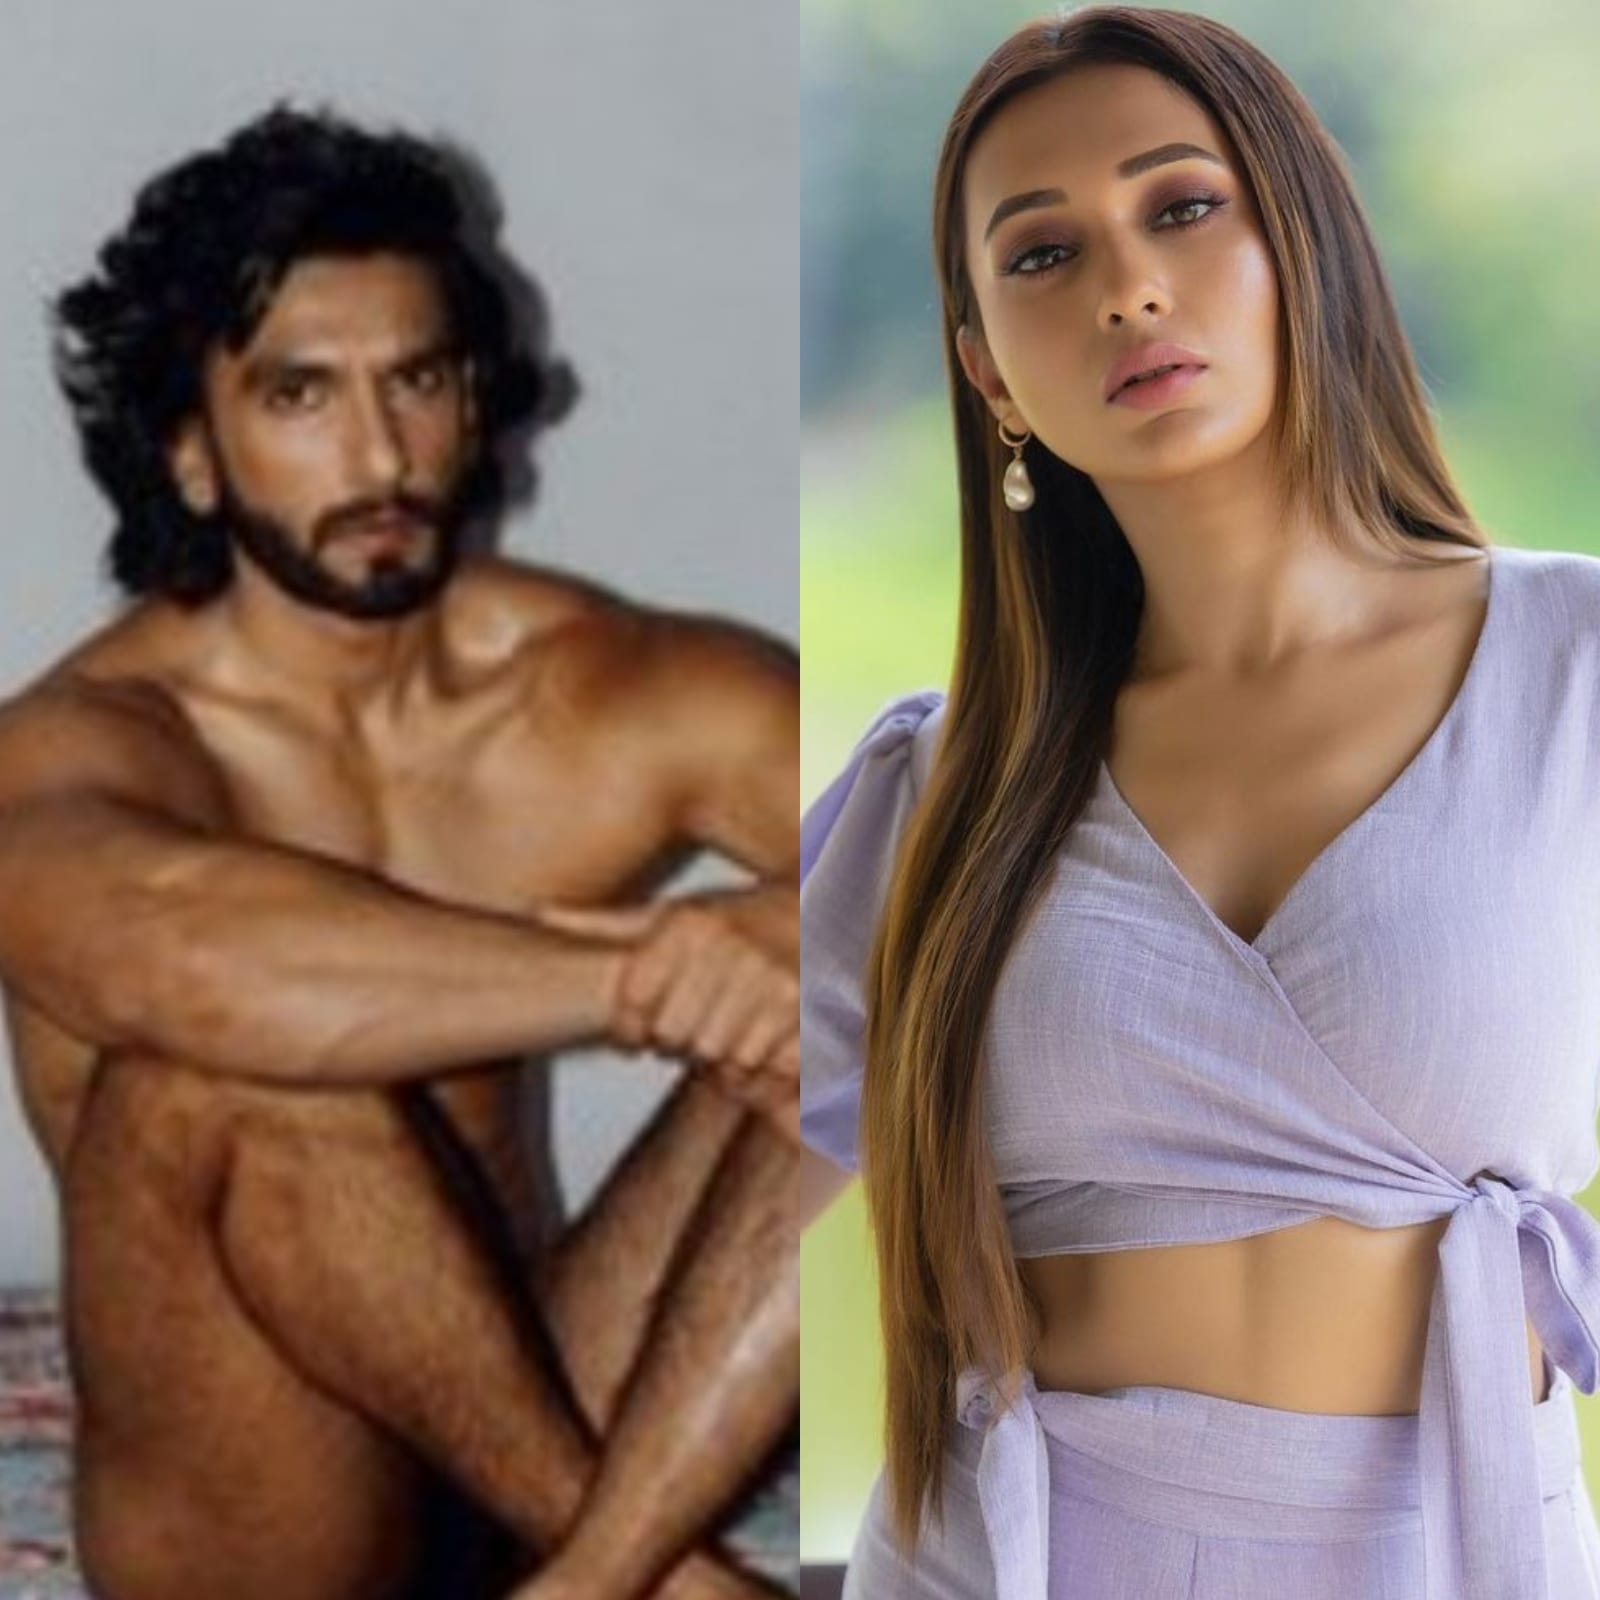 Mimi Chakraborty on Ranveer Singh's Nude Photoshoot: 'Wonder If  Appreciation Would Have Been The Same...' - News18